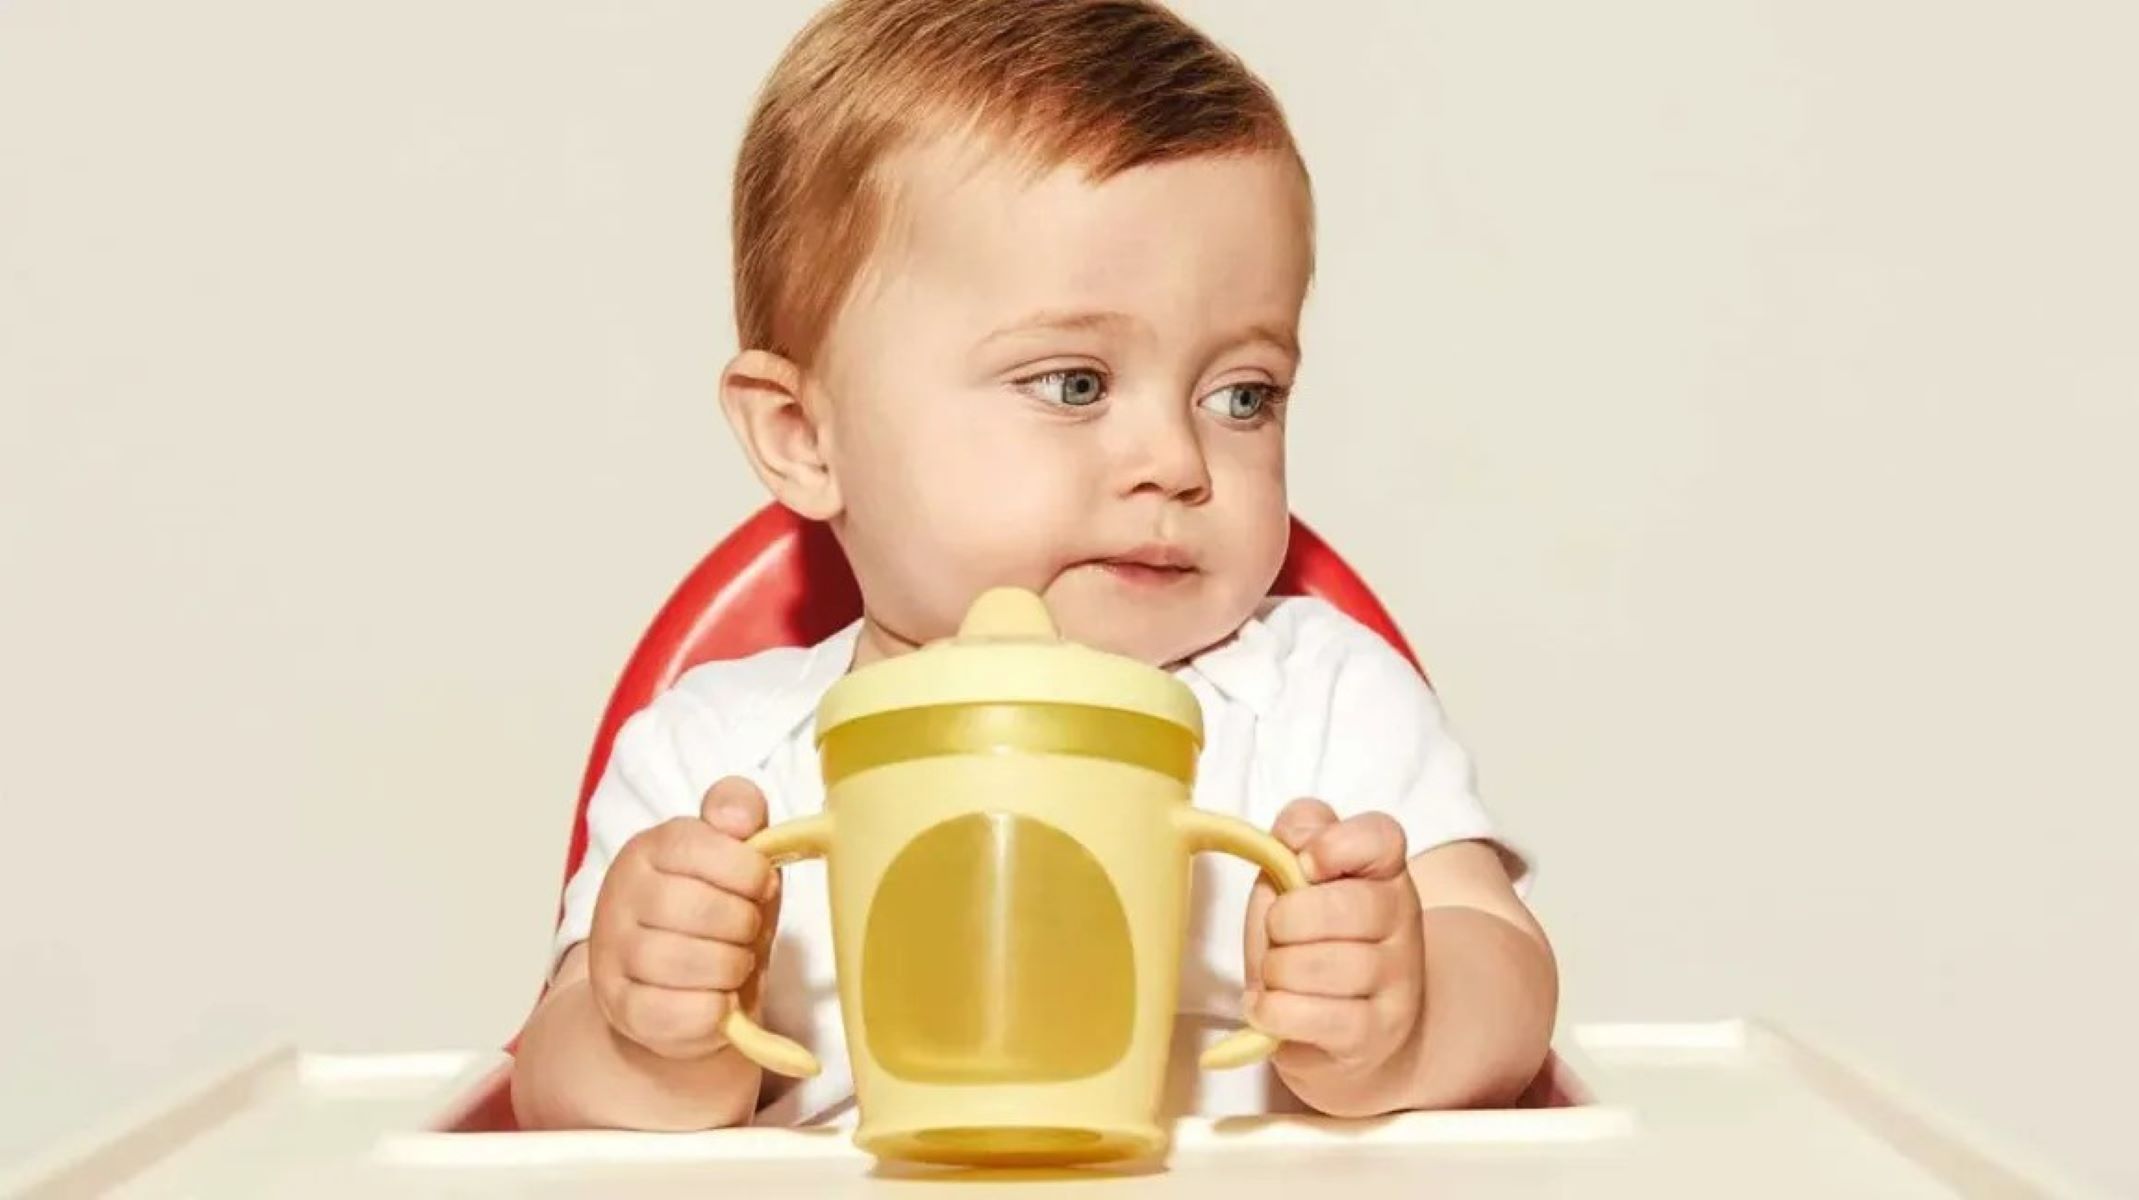 How To Teach A Baby To Use A Sippy Cup